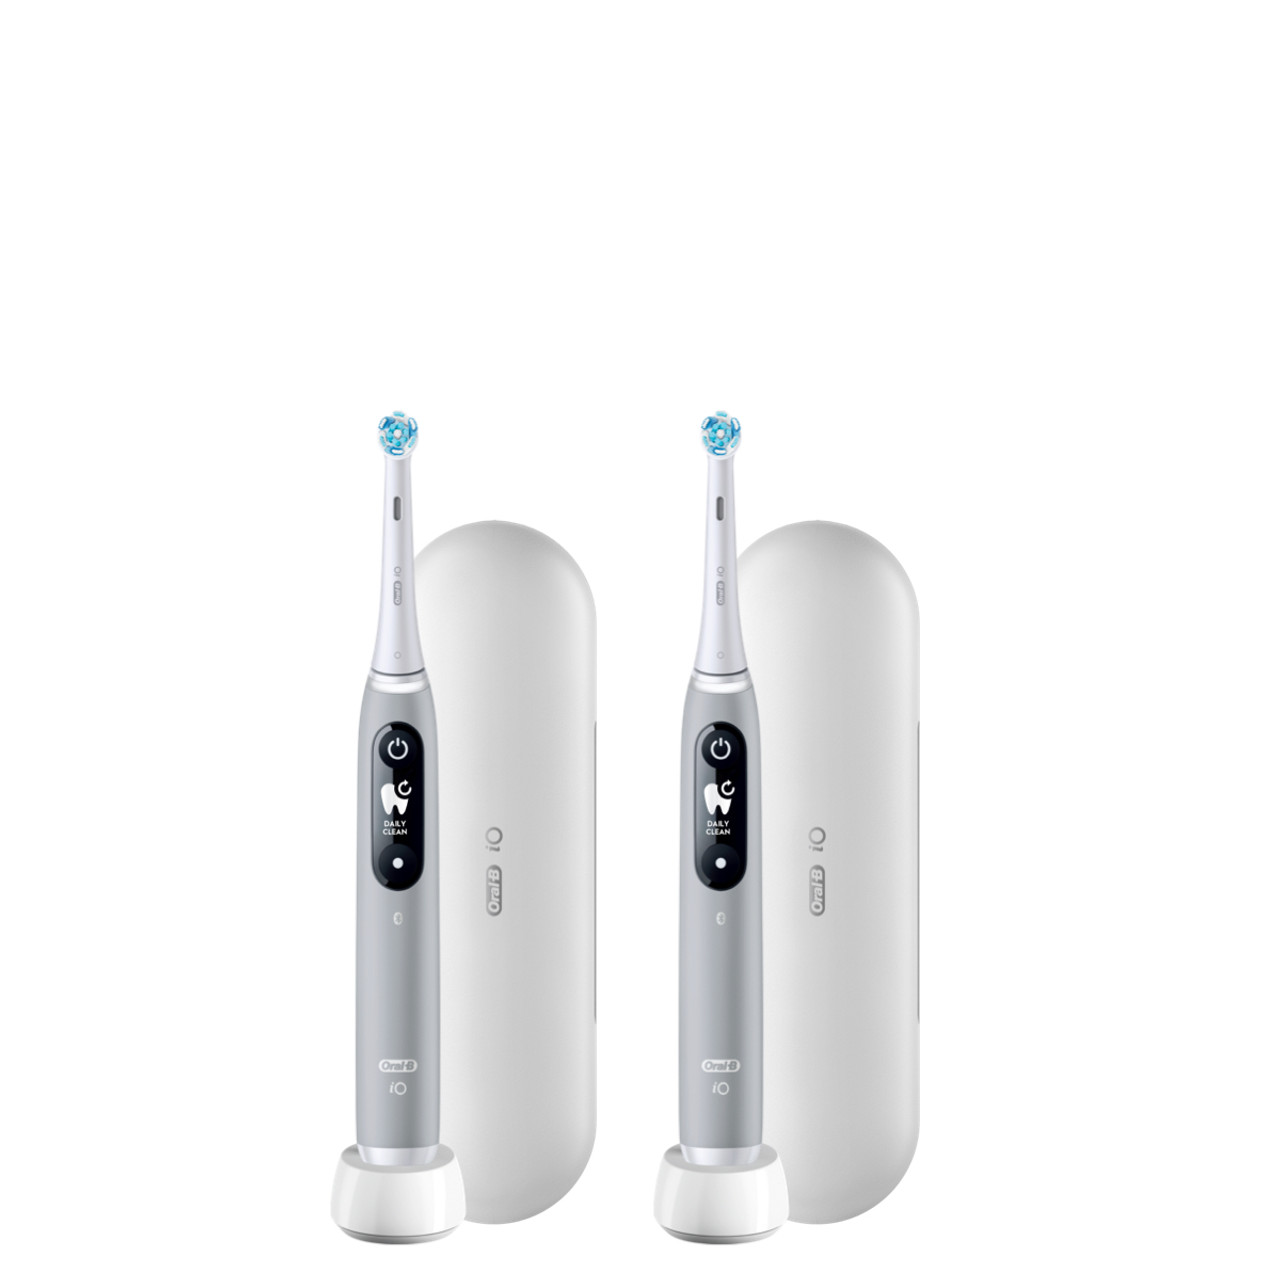 iO Series 6 Electric Toothbrush - Gray Opal for sale online